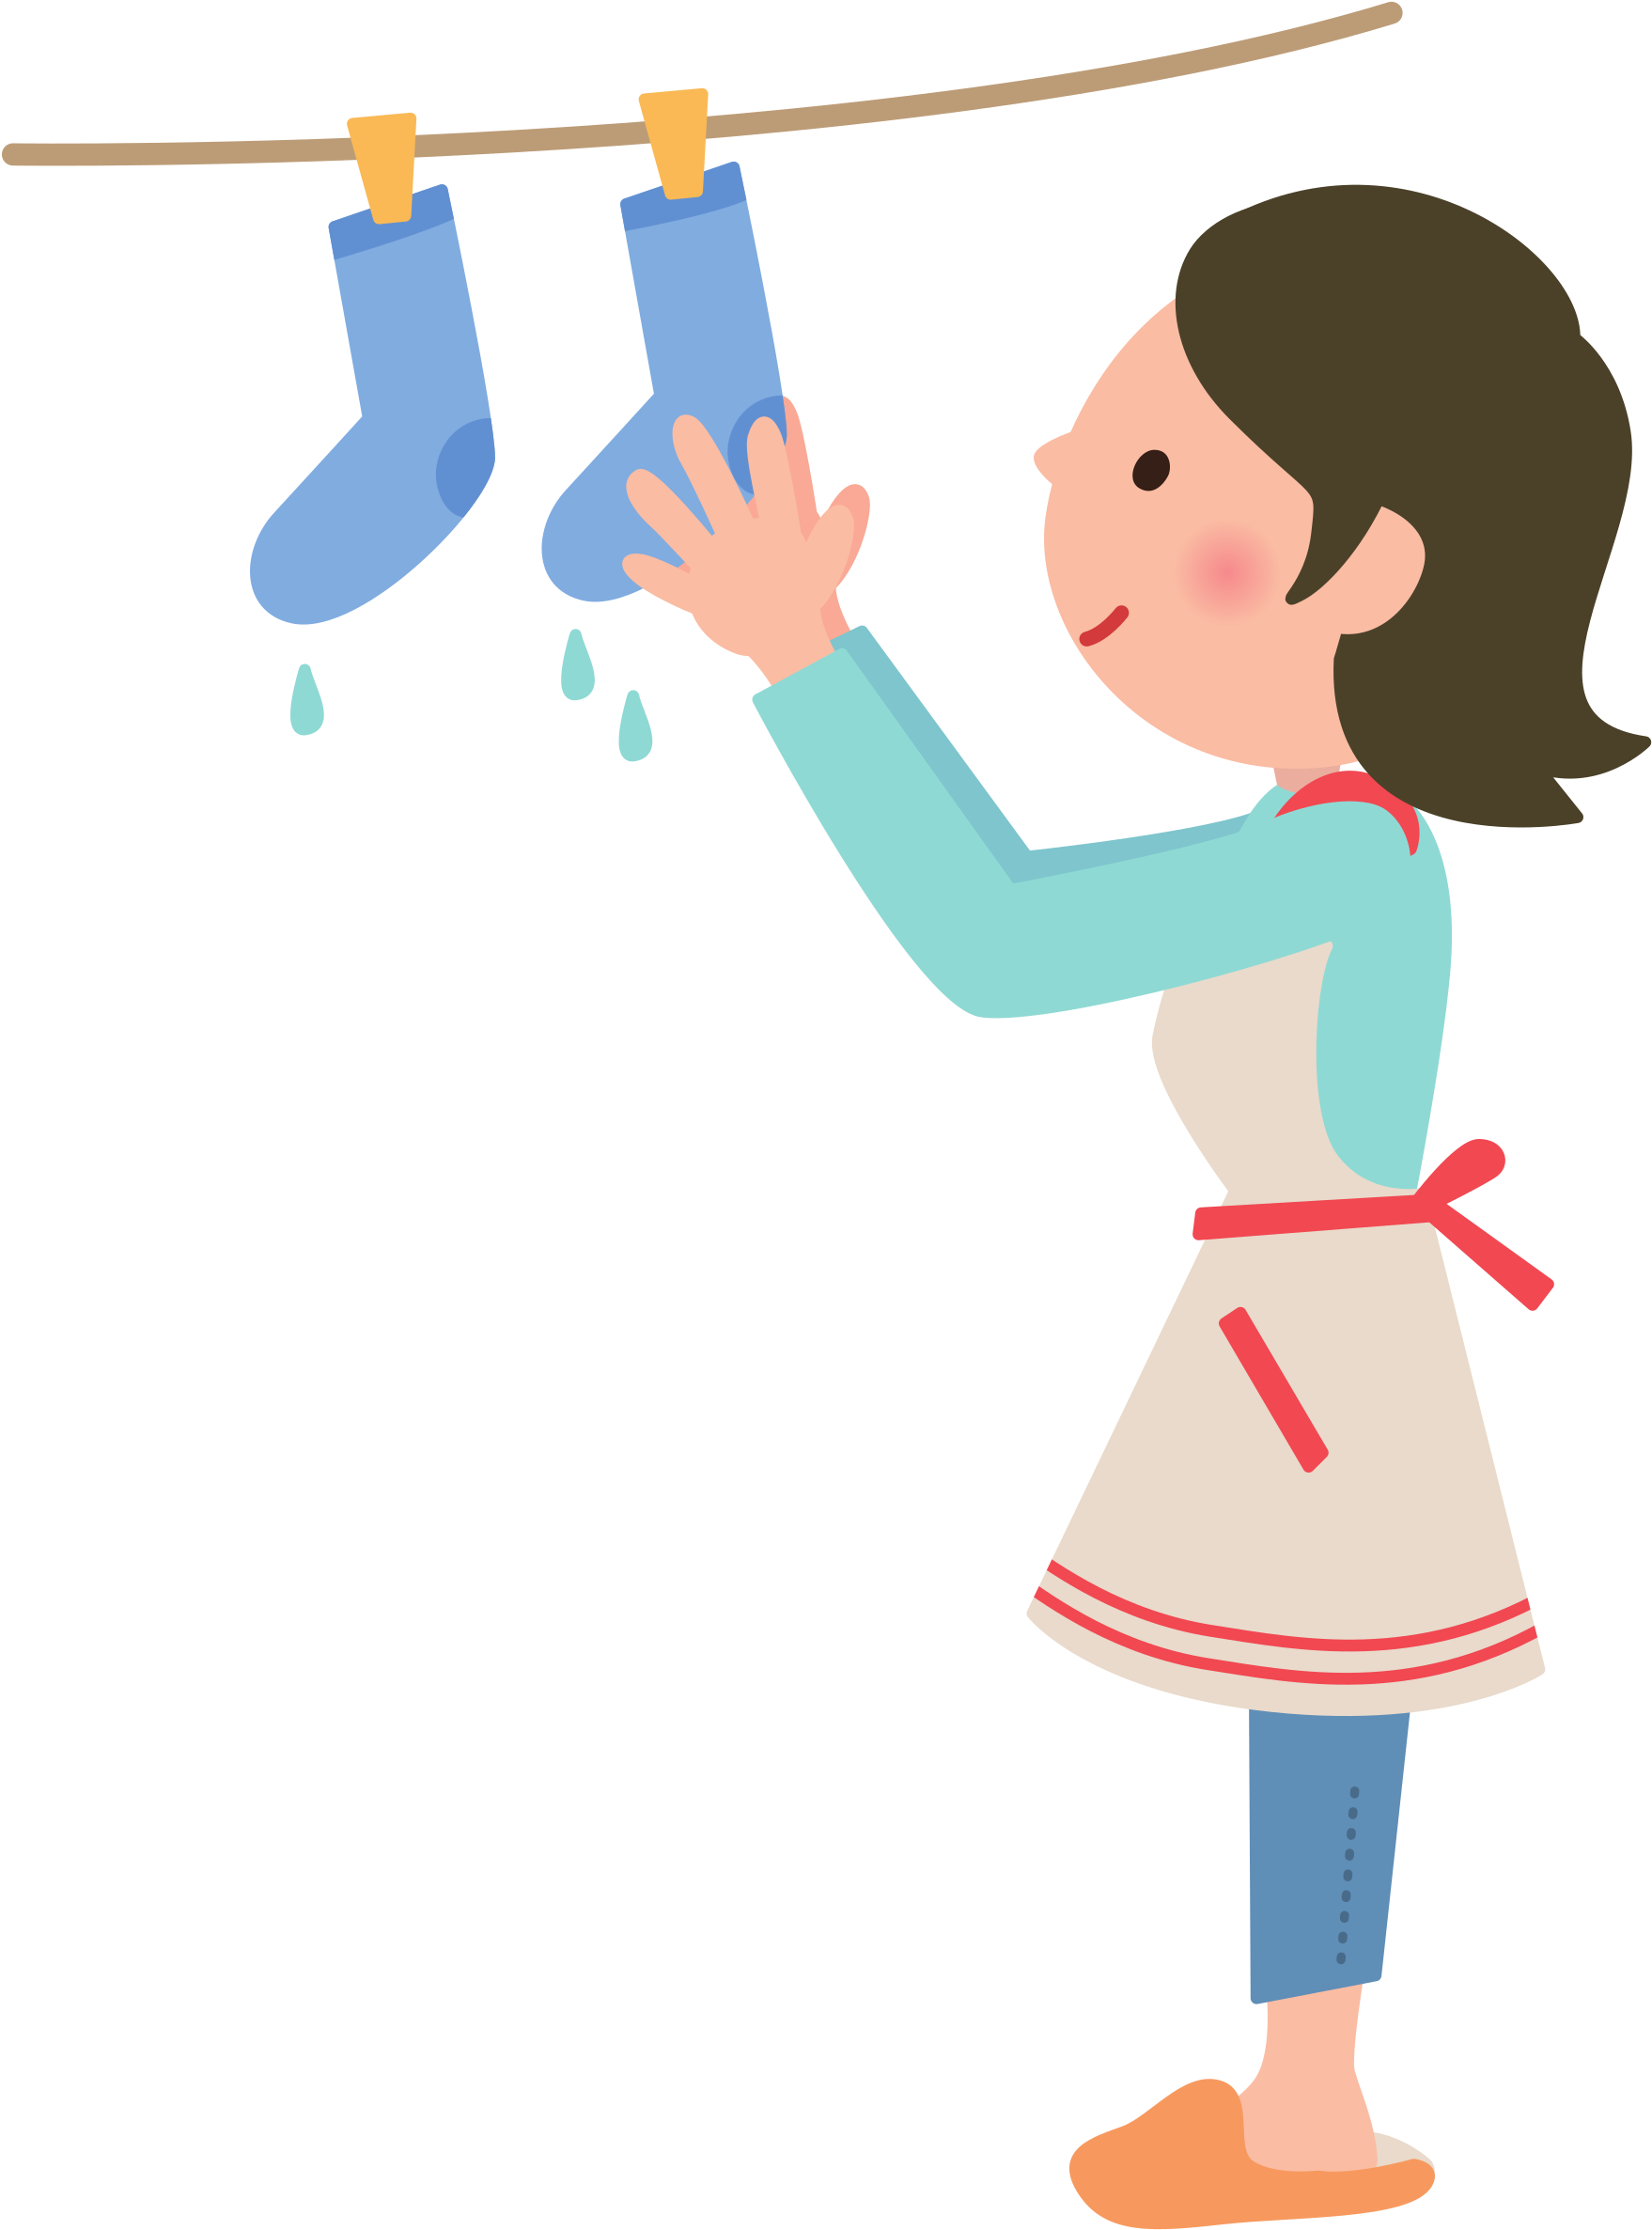 A Cartoon Of A Woman Holding A Pair Of Socks